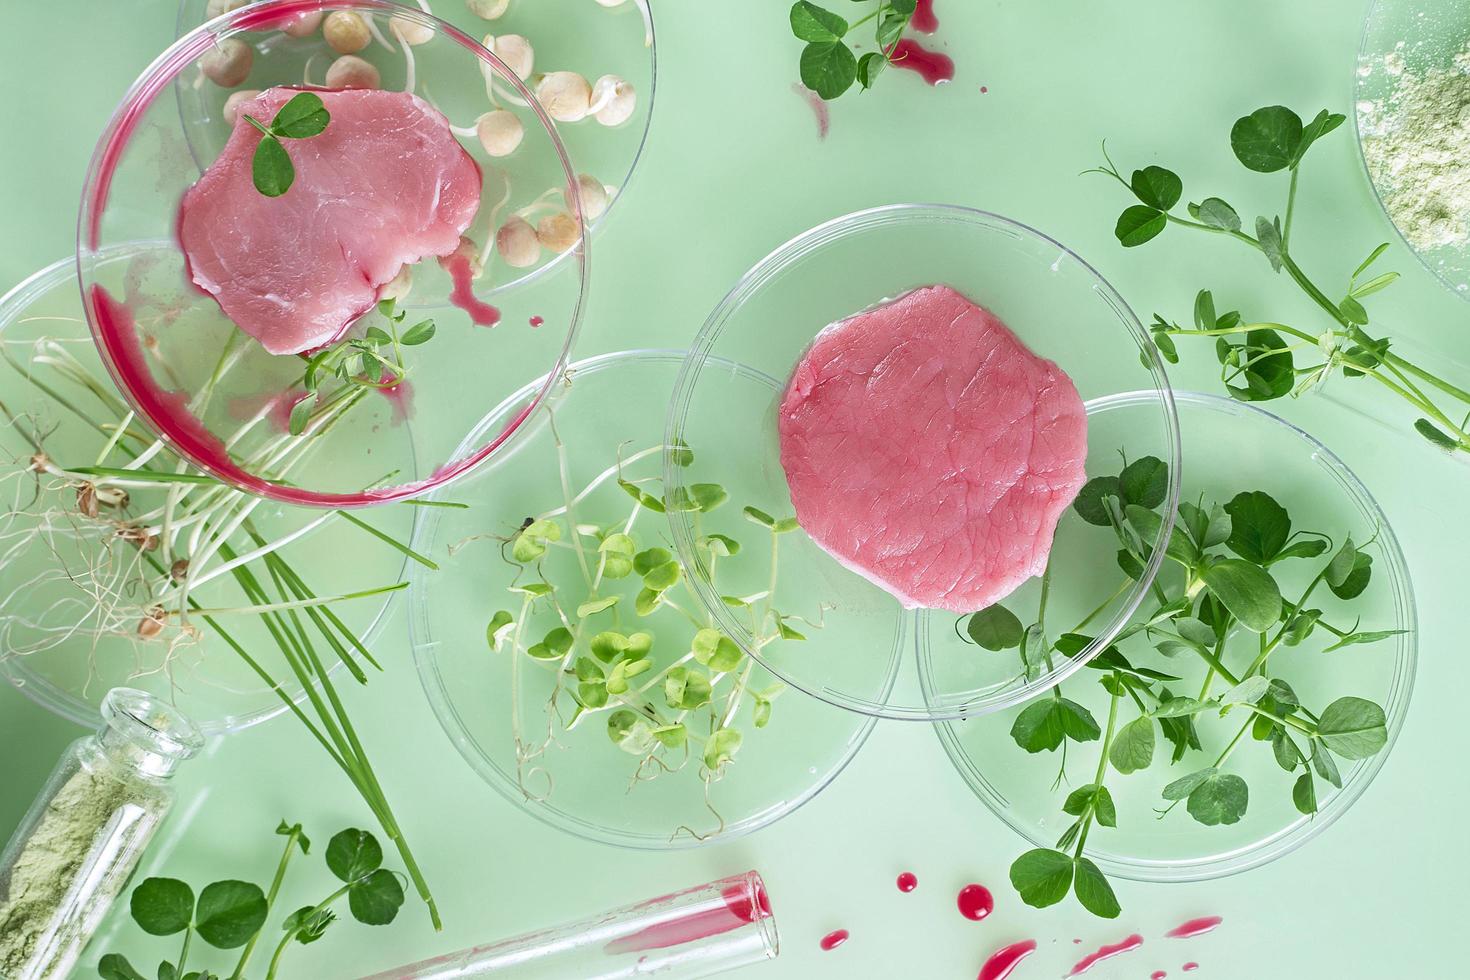 Cultivated steak, meat from the plant stem cell, new food innovation, no killing laboratory-grown meat concept photo